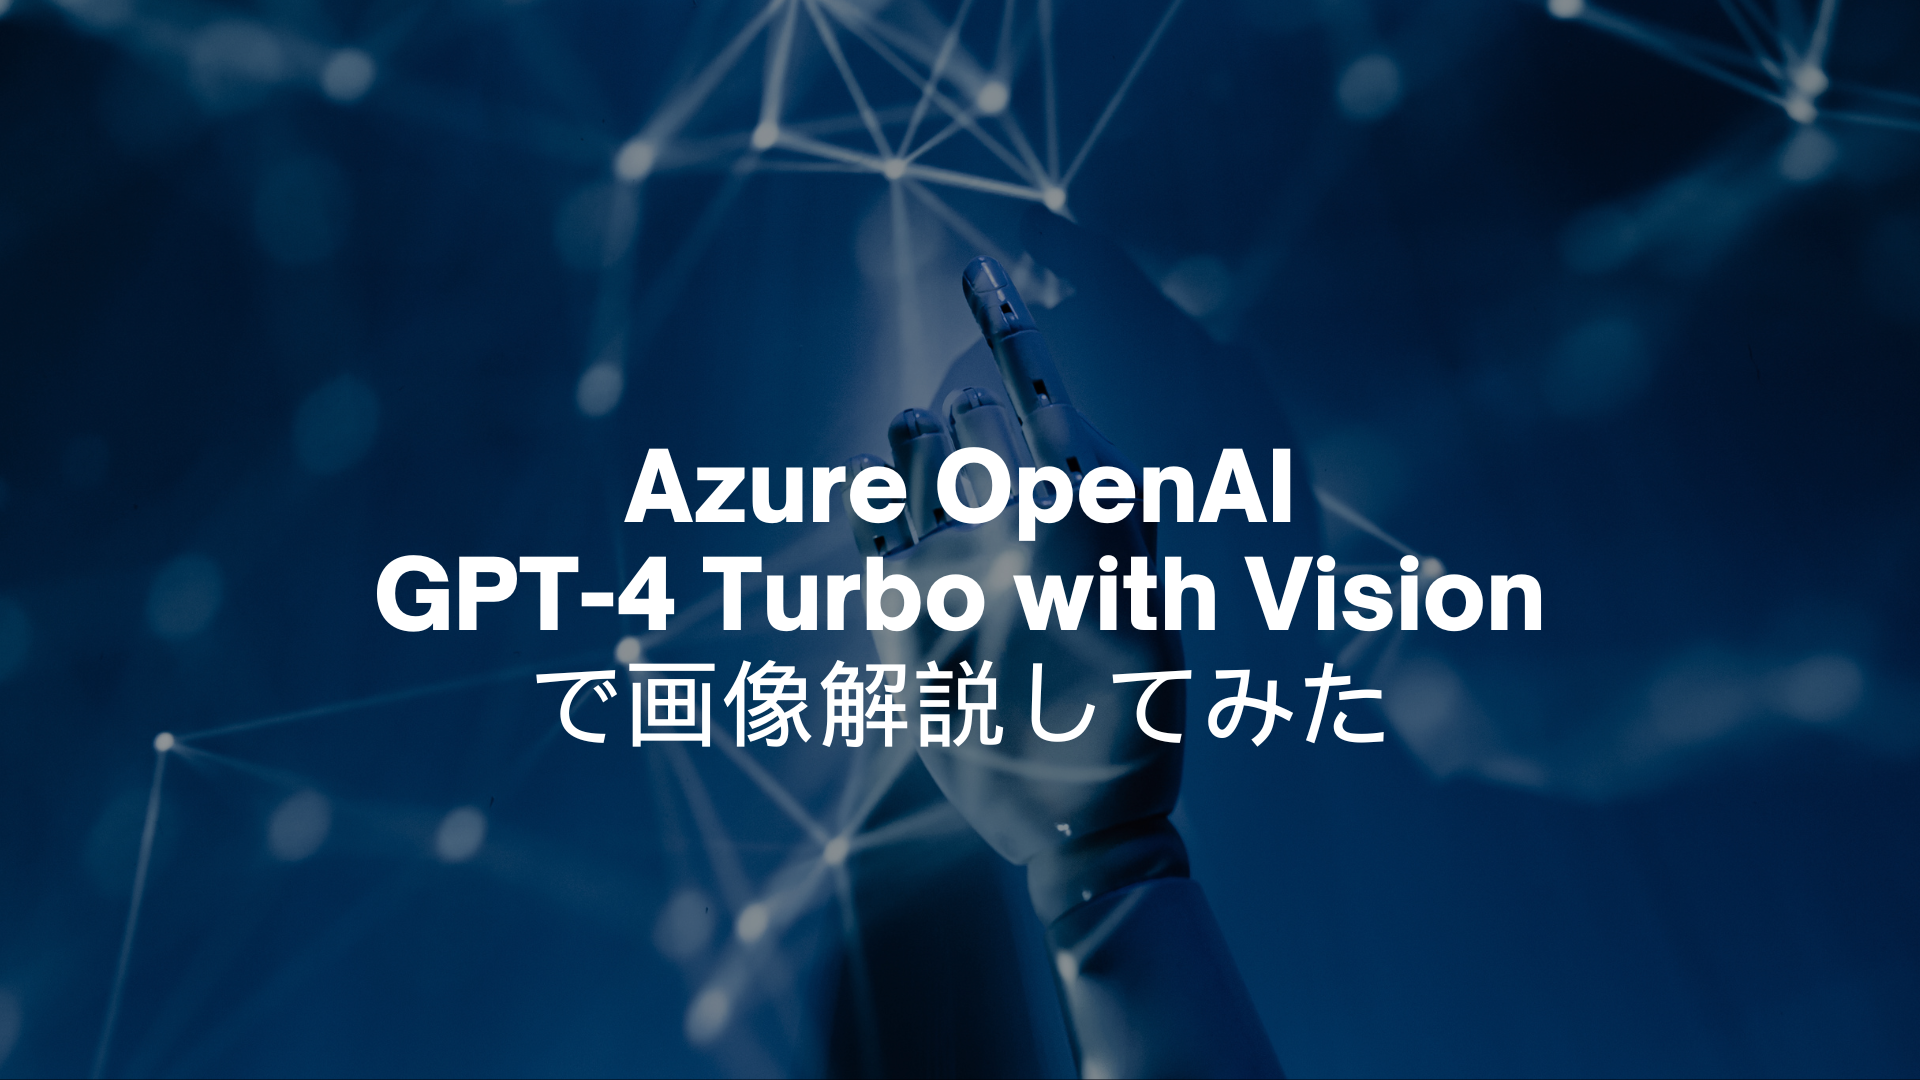 Azure OpenAI GPT-4 Turbo with Visionで画像解説してみた